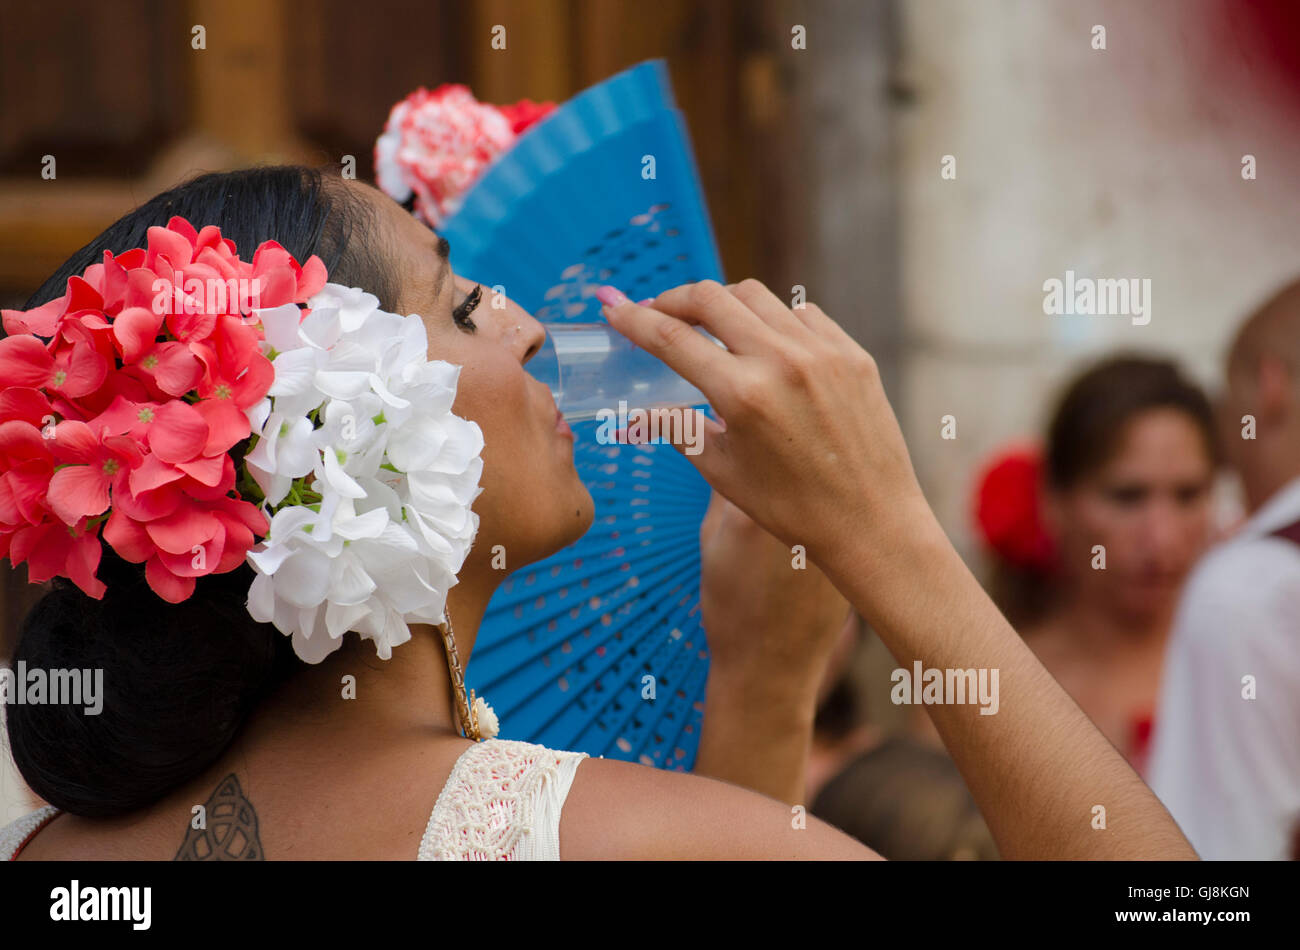 Malaga, Andalusia, Spain. 13th Aug, 2016. Beautiful Spanish woman drinking sherry during start of Annual Feria of Malaga, Southern Spain's biggest summer fair starts. The feria celebrations. Credit:  Perry van Munster/Alamy Live News Stock Photo